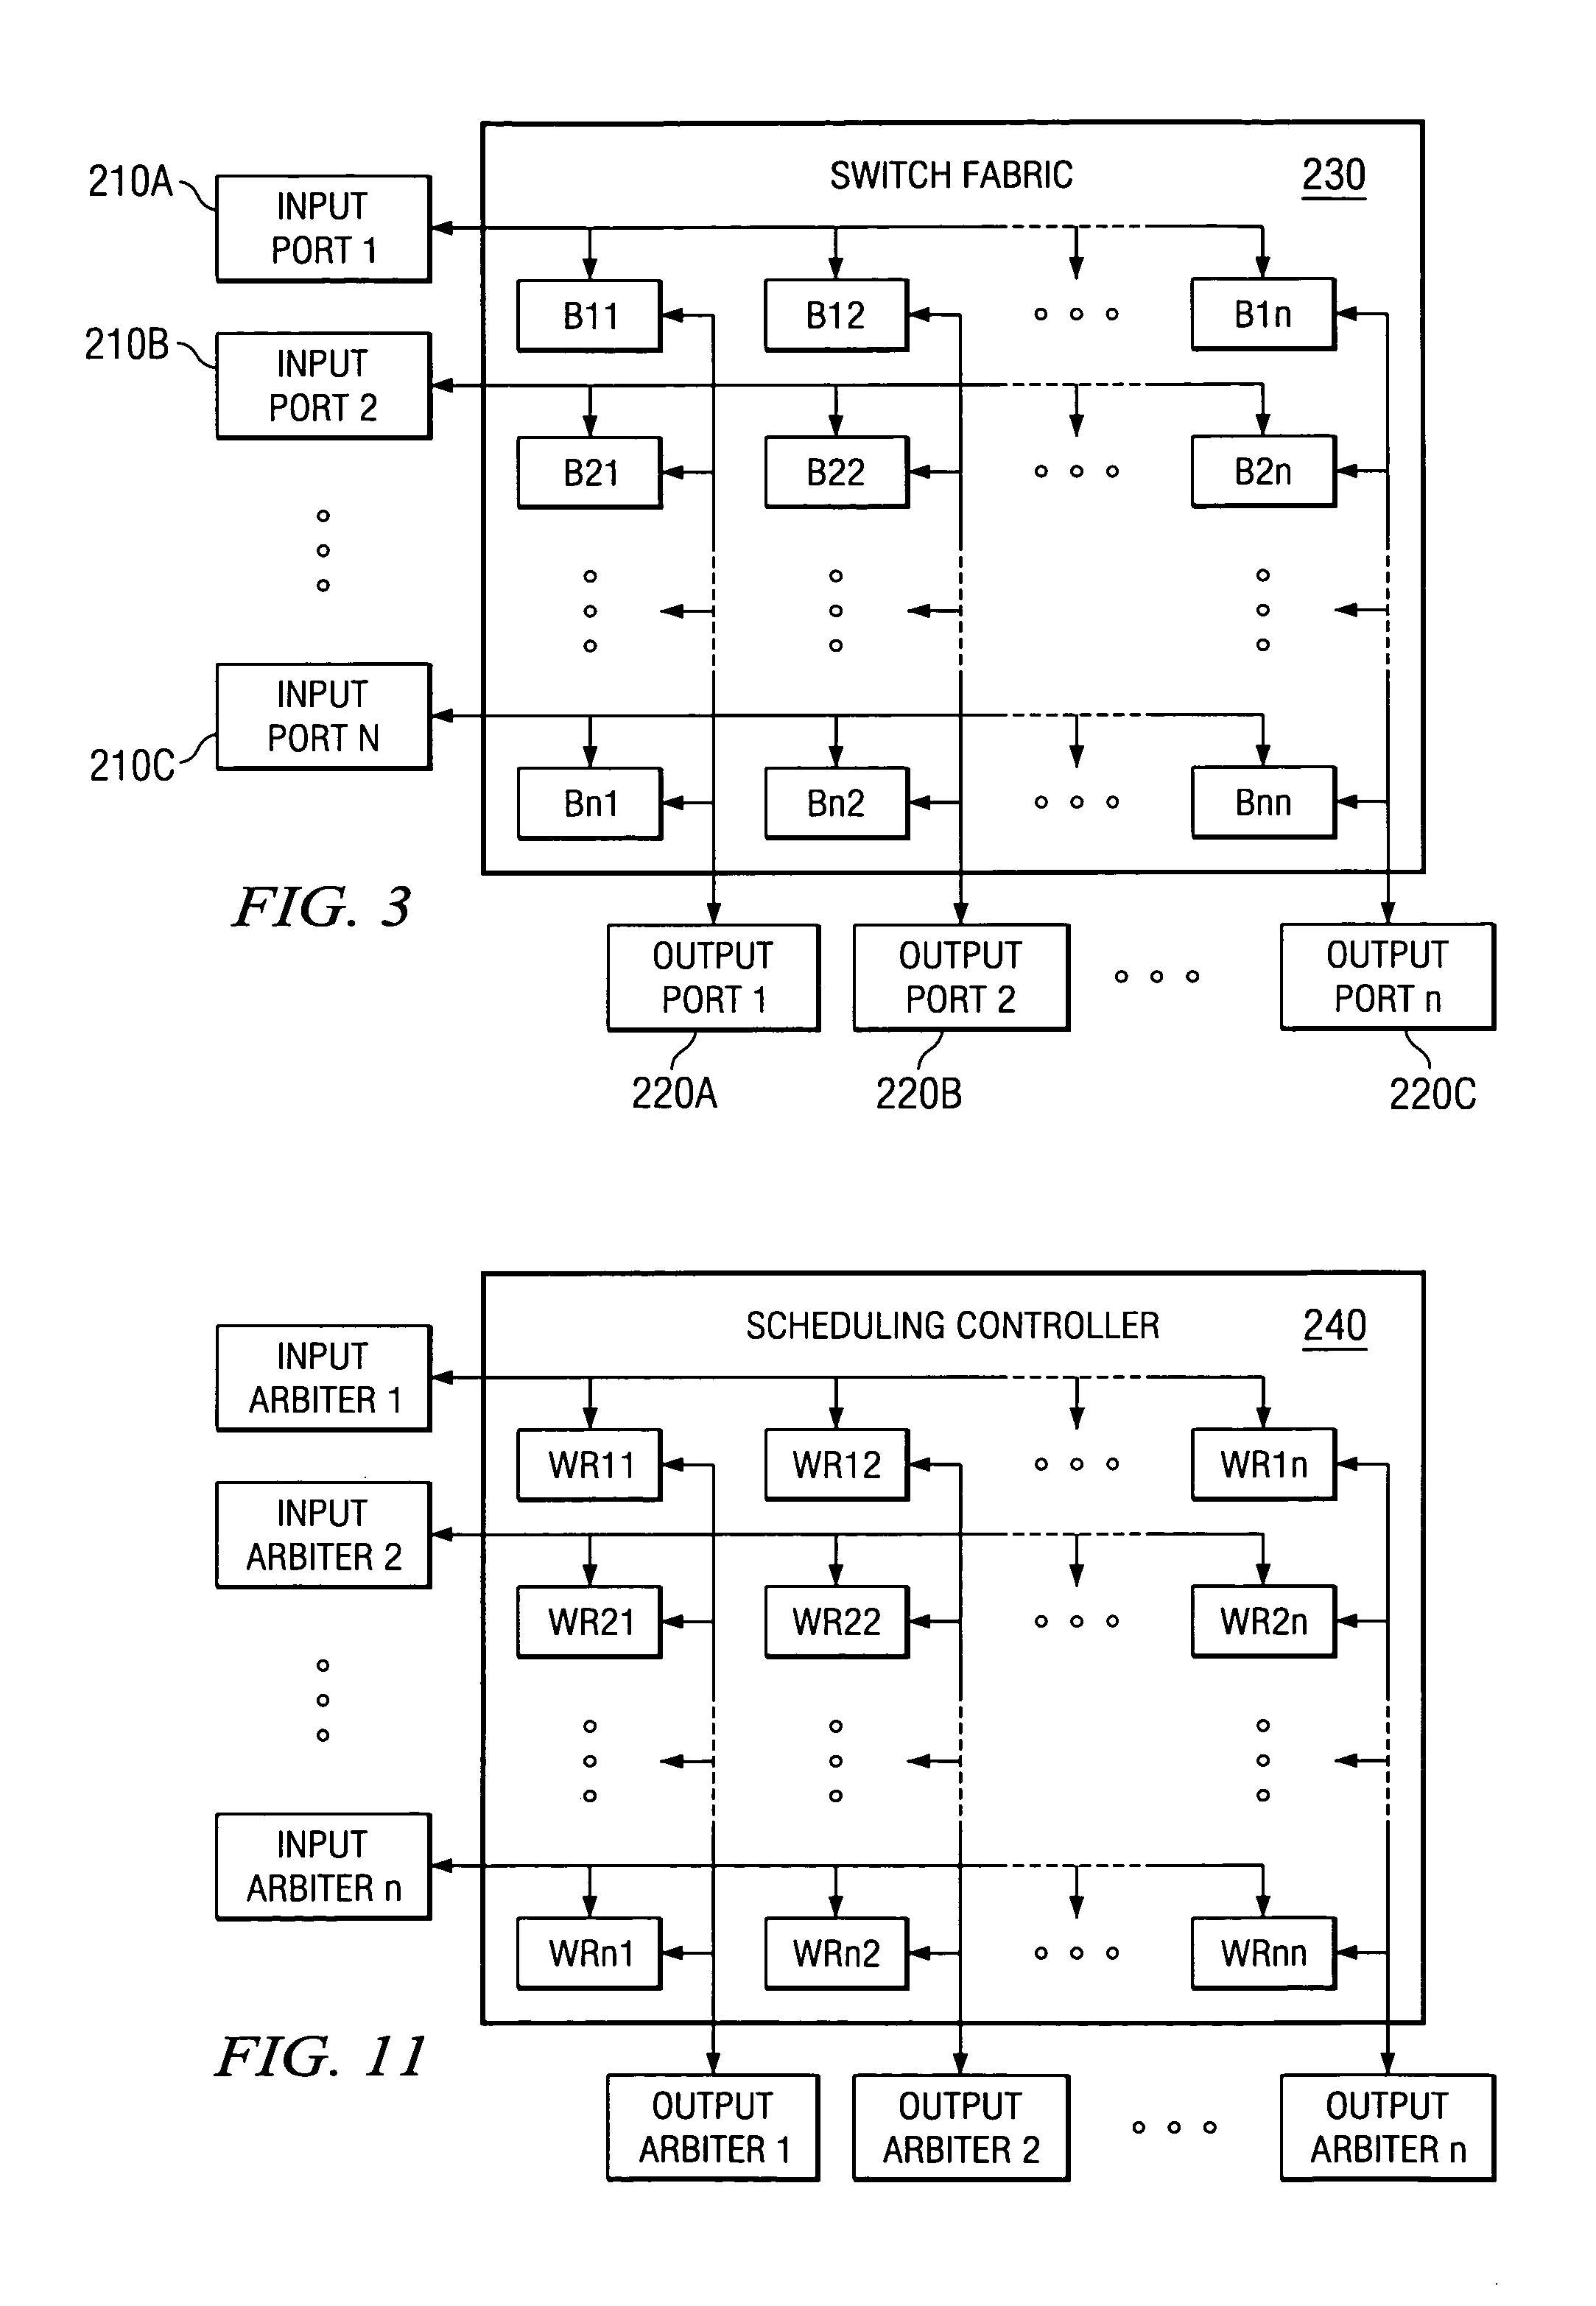 Apparatus for switching data in high-speed networks and method of operation